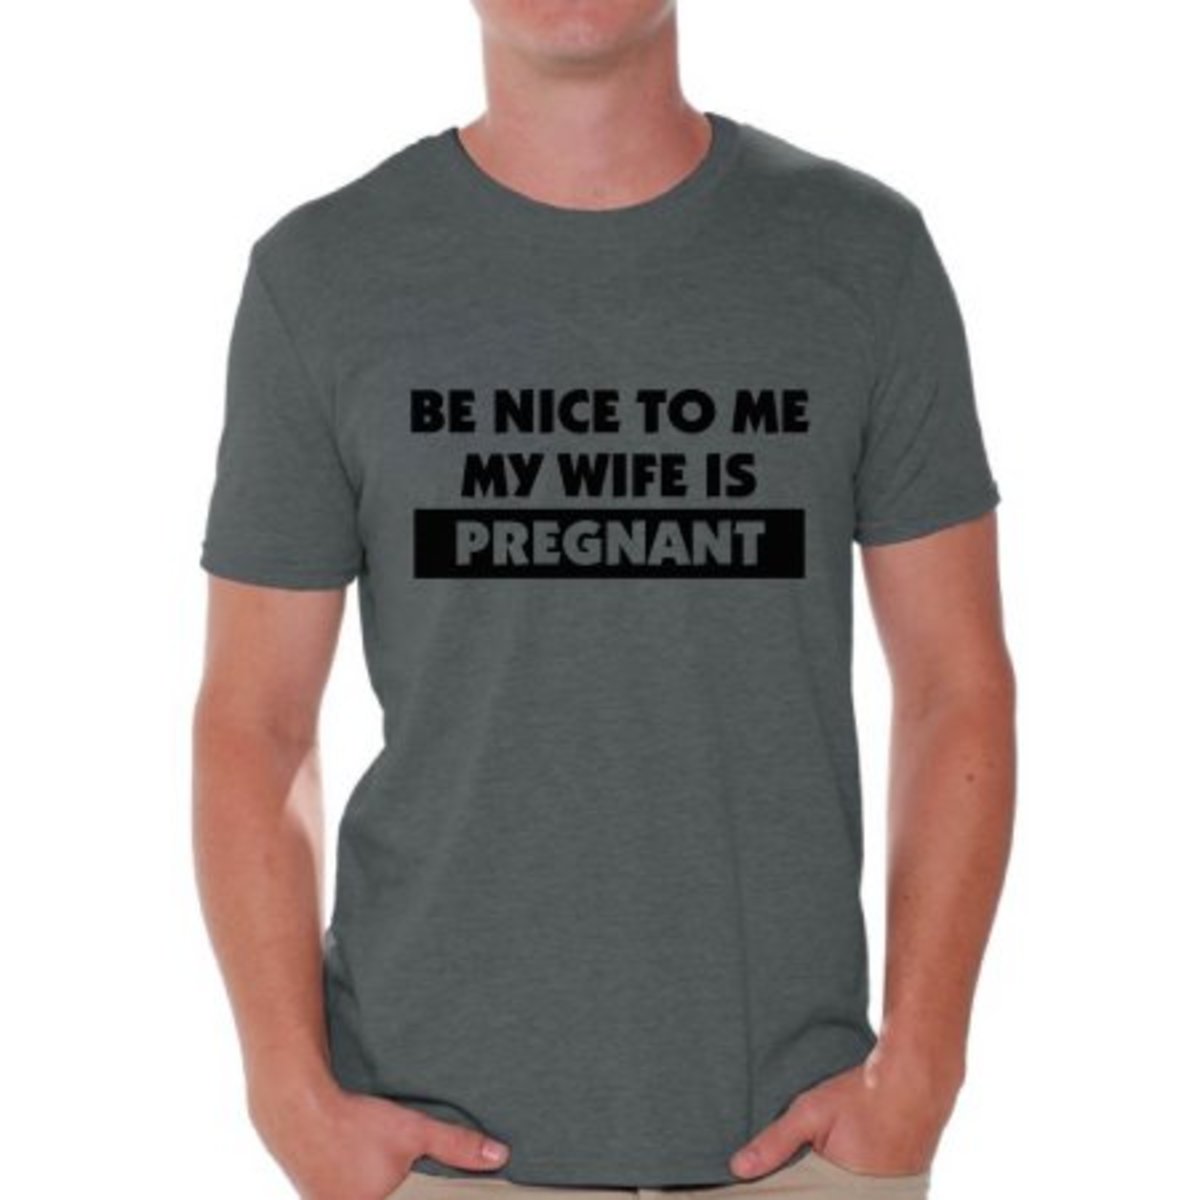 "Be Nice to Me My Wife Is Pregnant" T-shirt